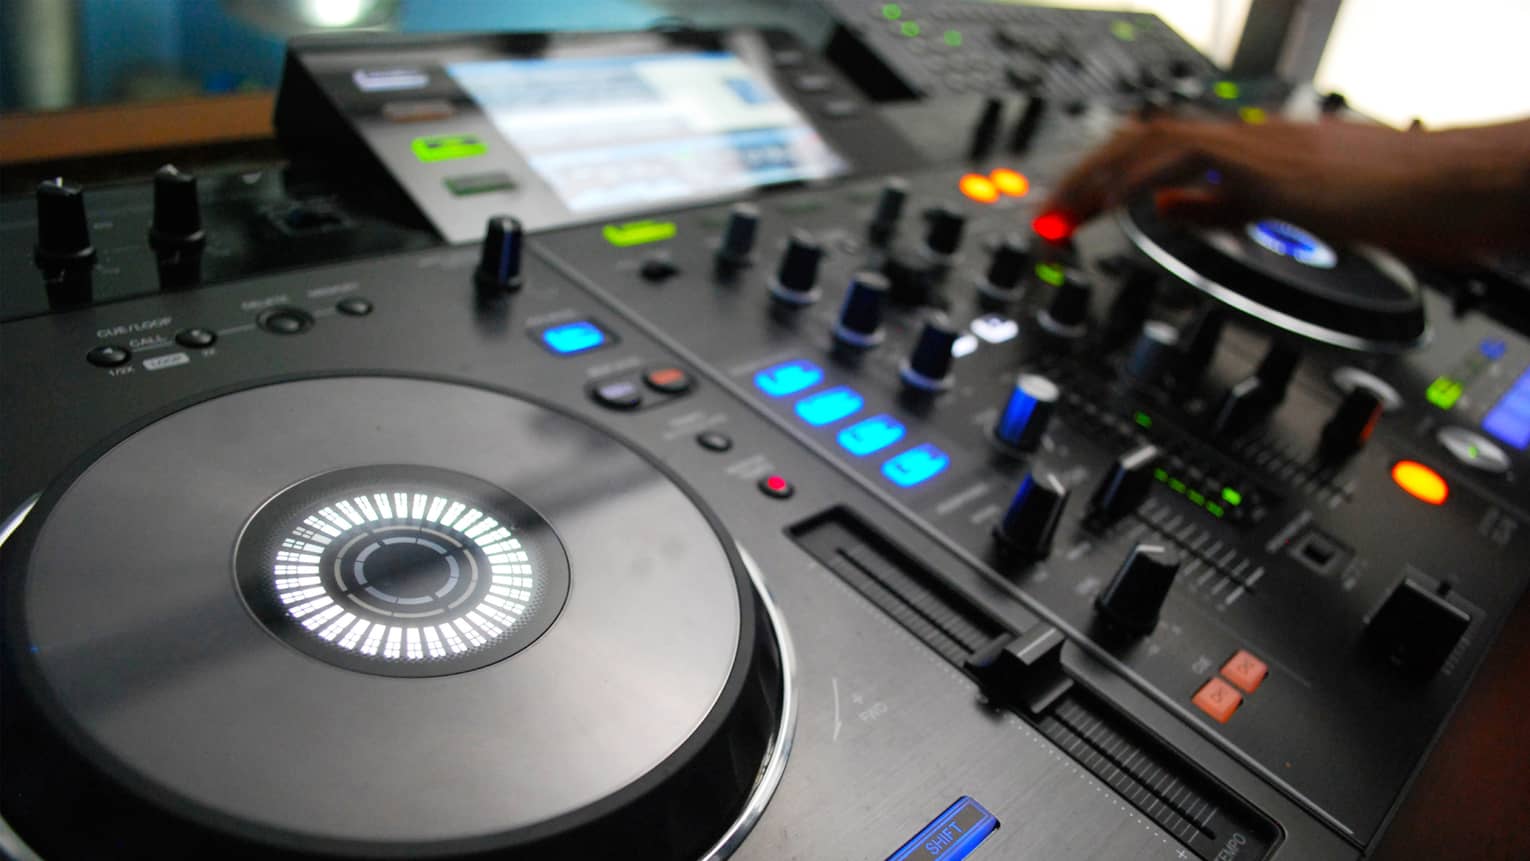 Close-up of DJ console discs, buttons, lights, hand adjusting levels